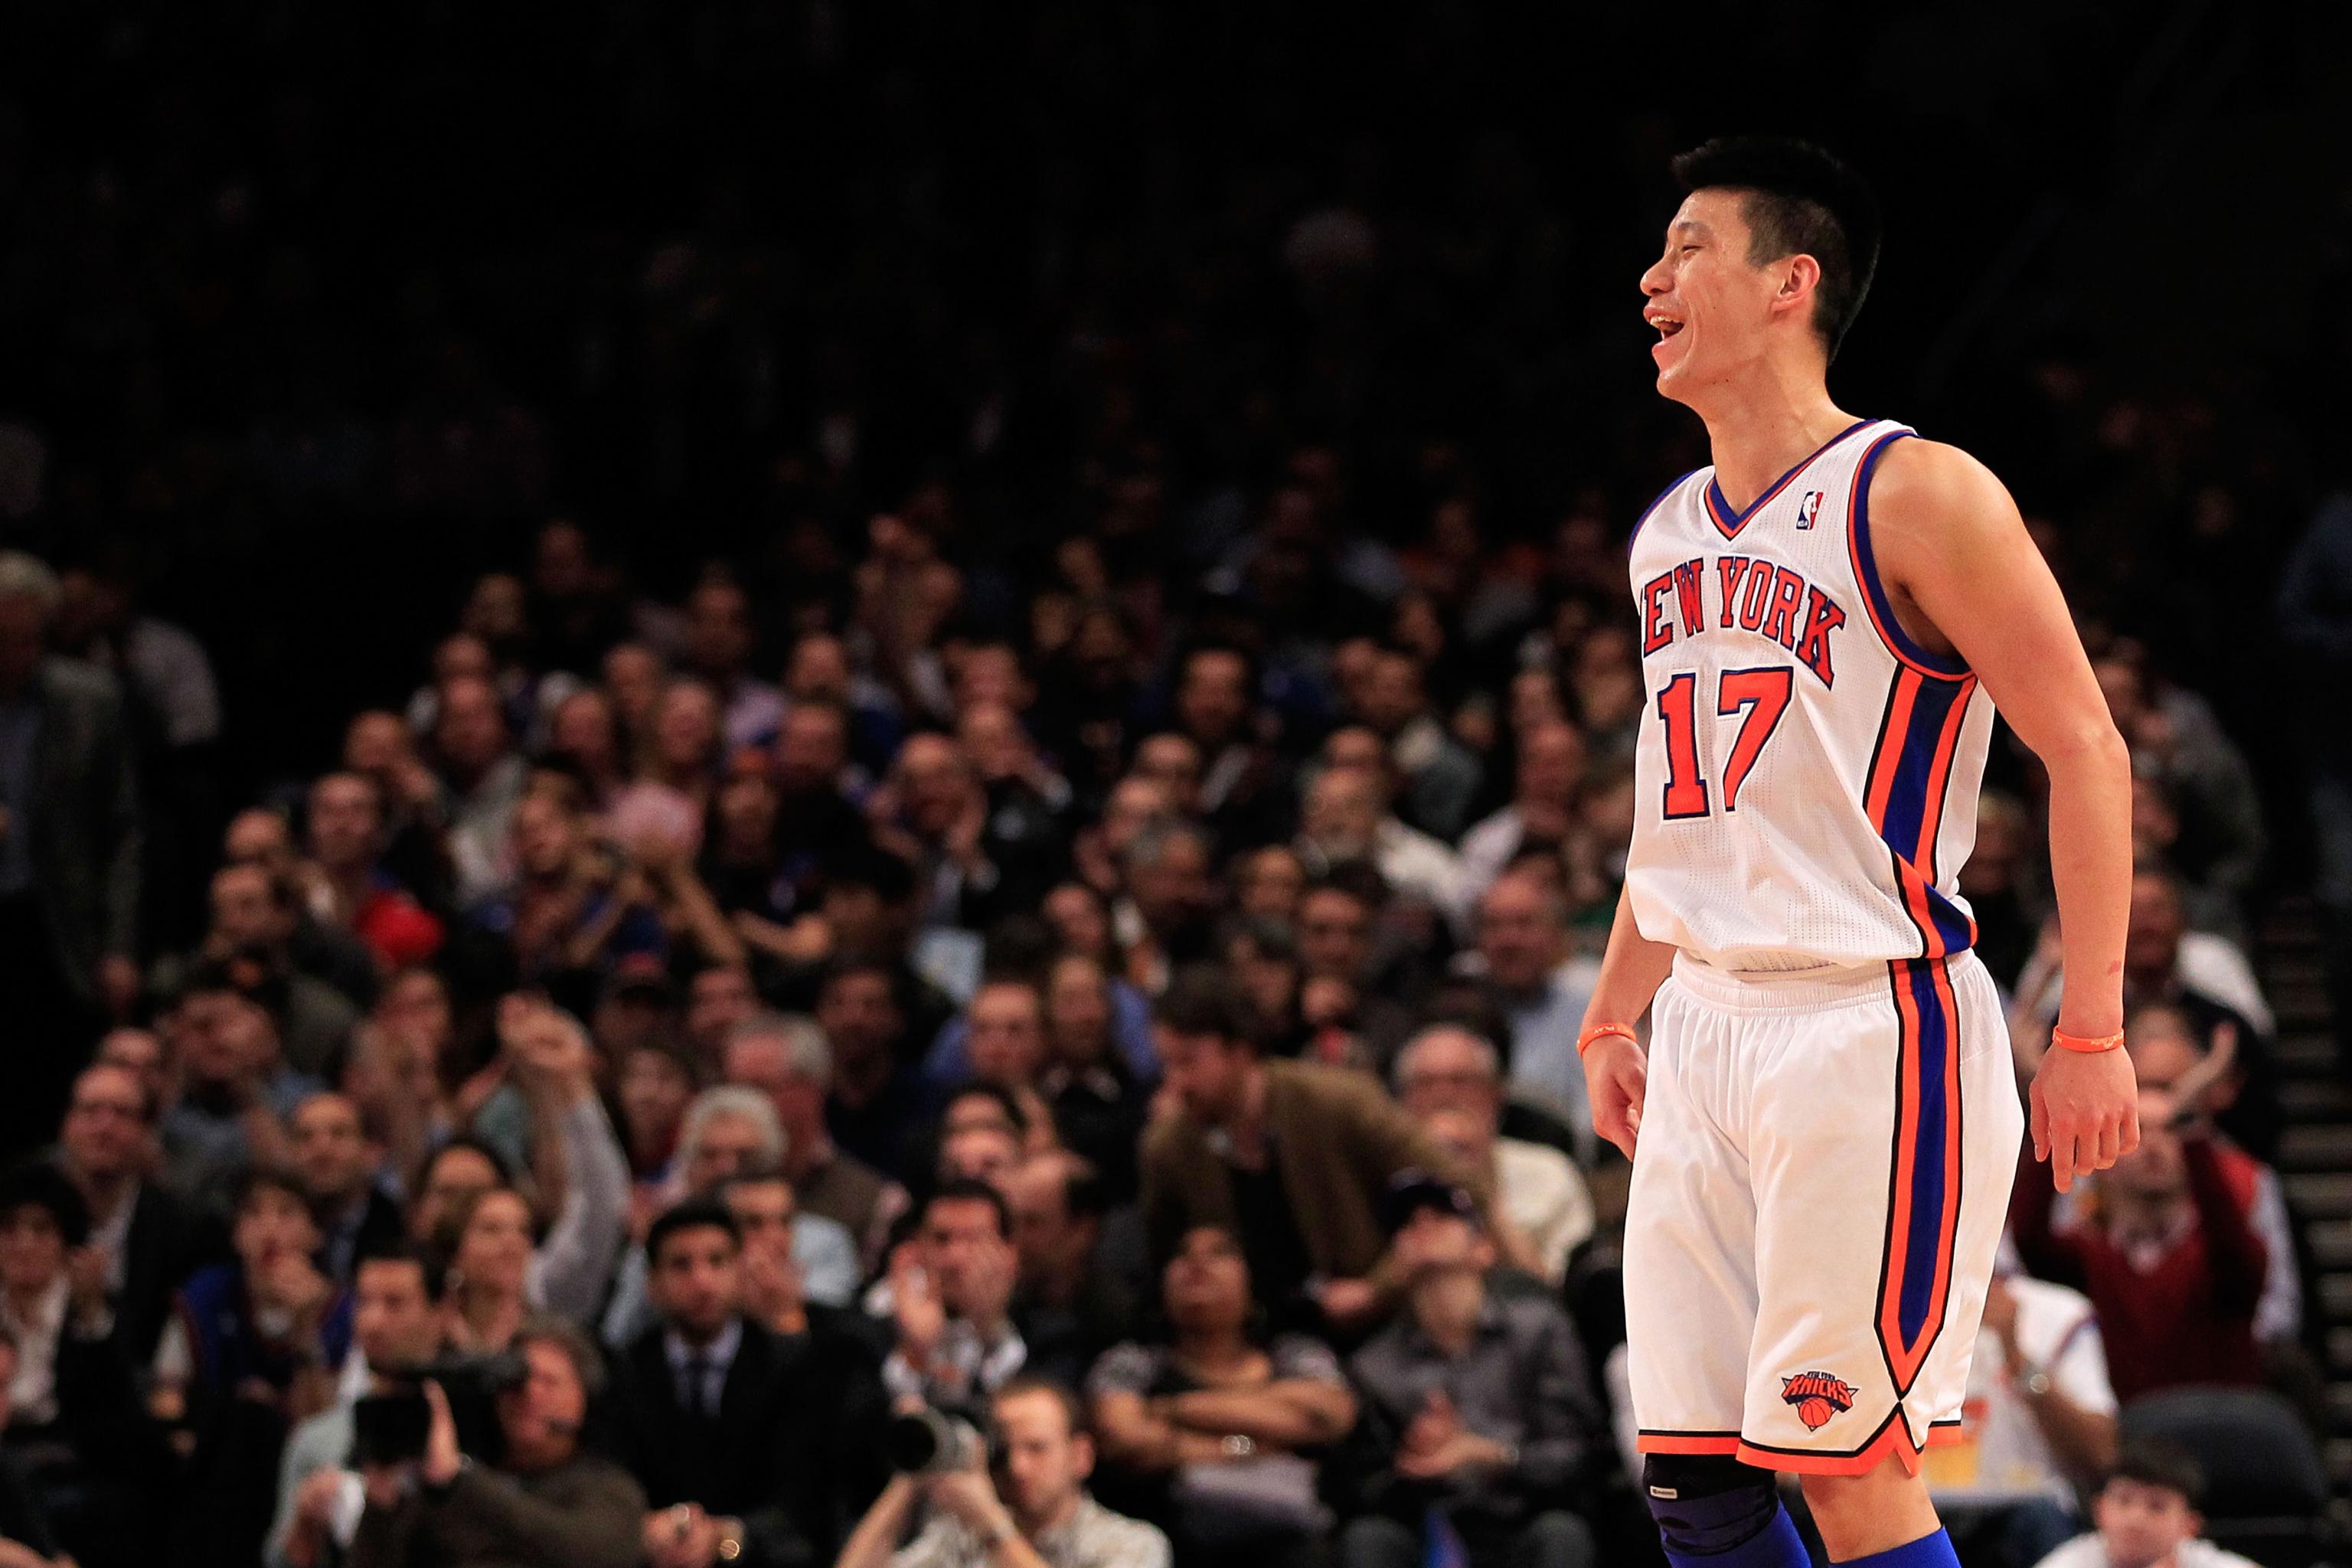 NY Knicks sensation Jeremy Lin plans to move off his brother's couch NBA's  hot new point guard ready for his own place – New York Daily News